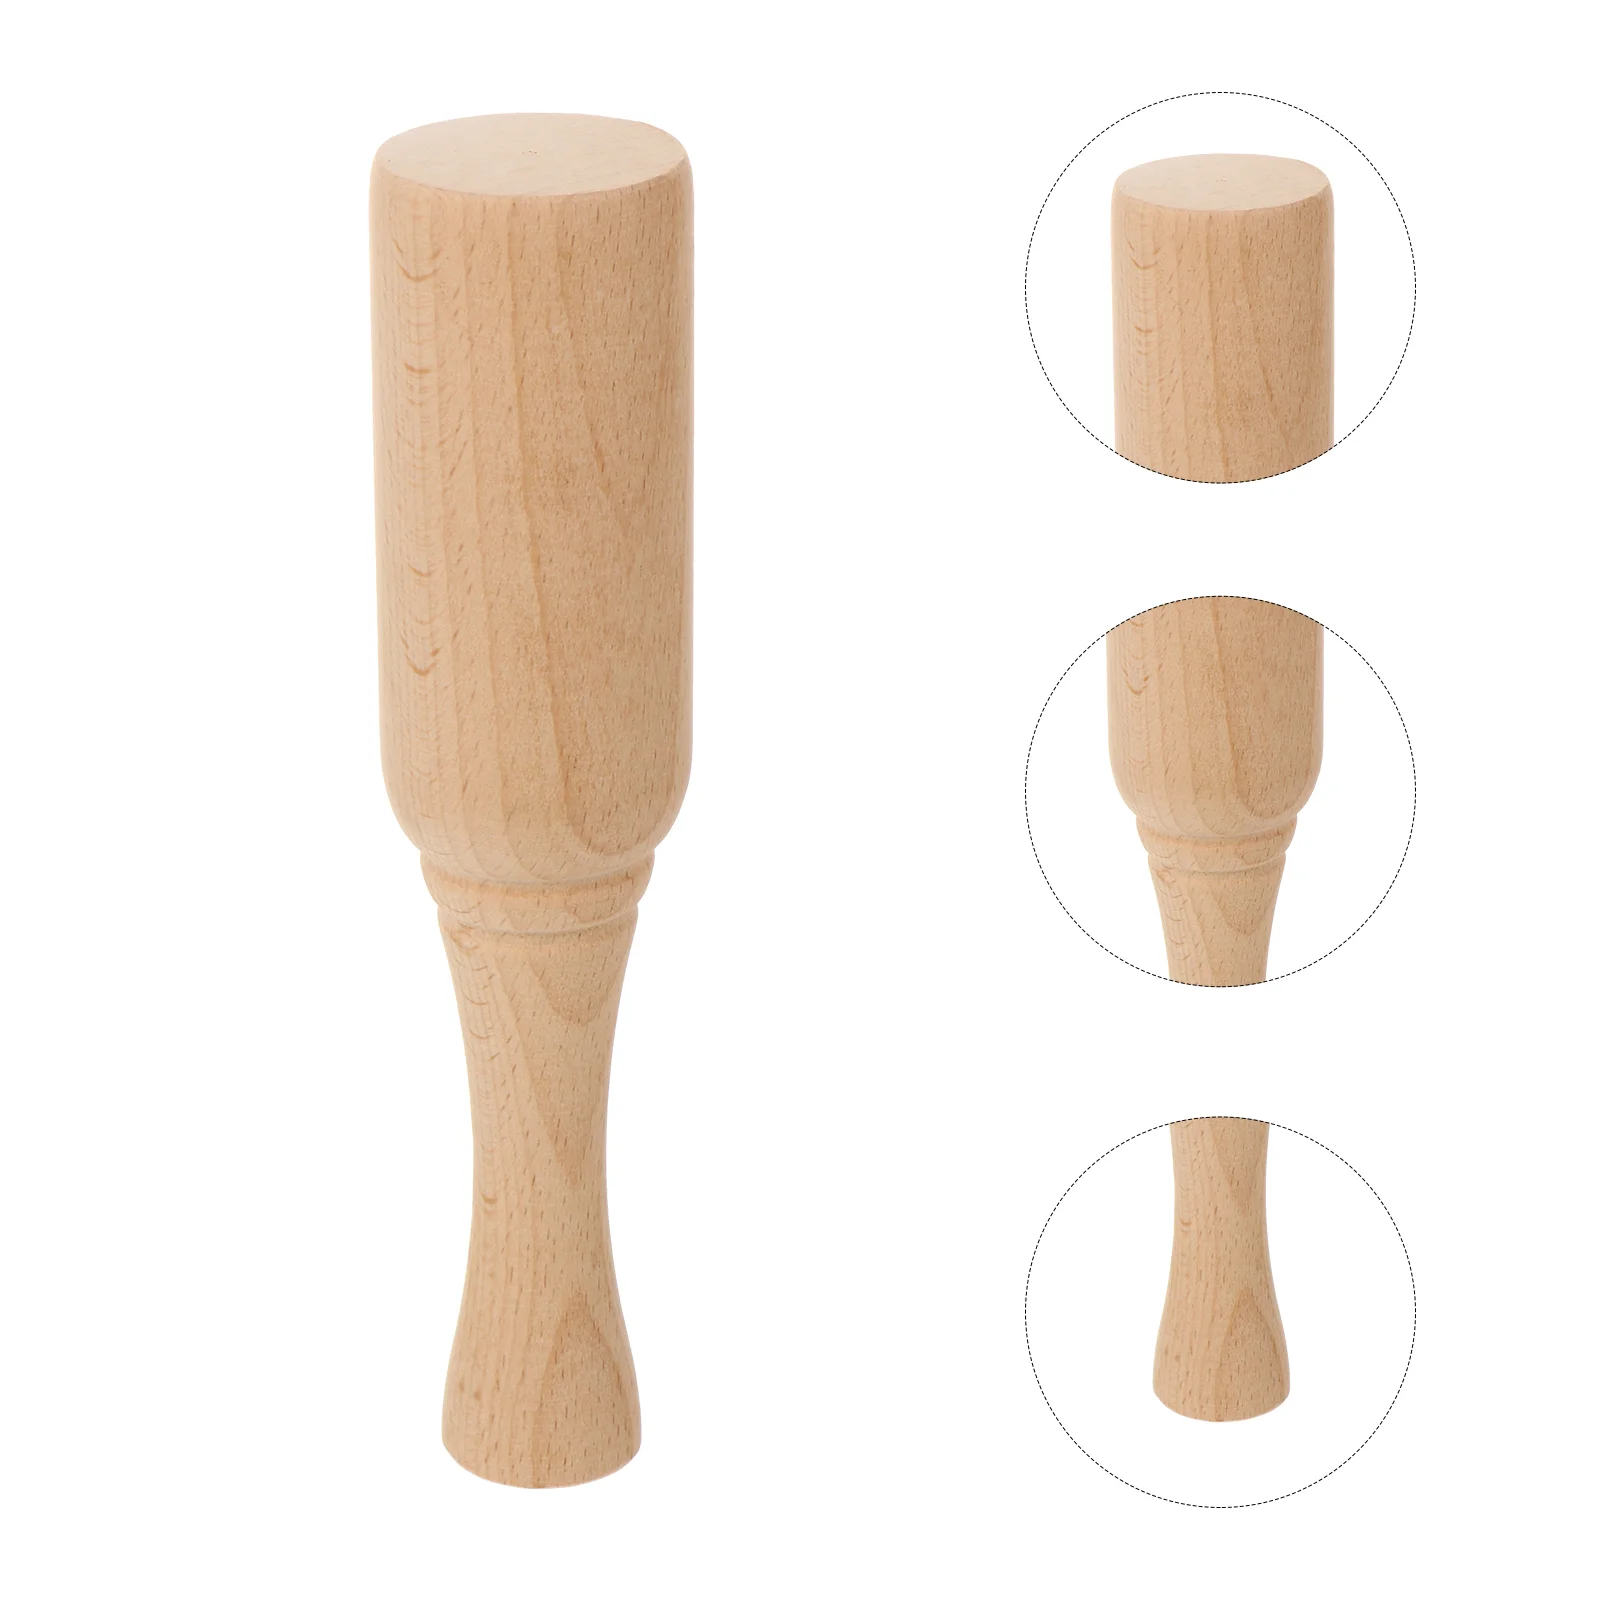 

Beech Wooden Wooden Mallet for Woodworking Kids Education Lobster Craft